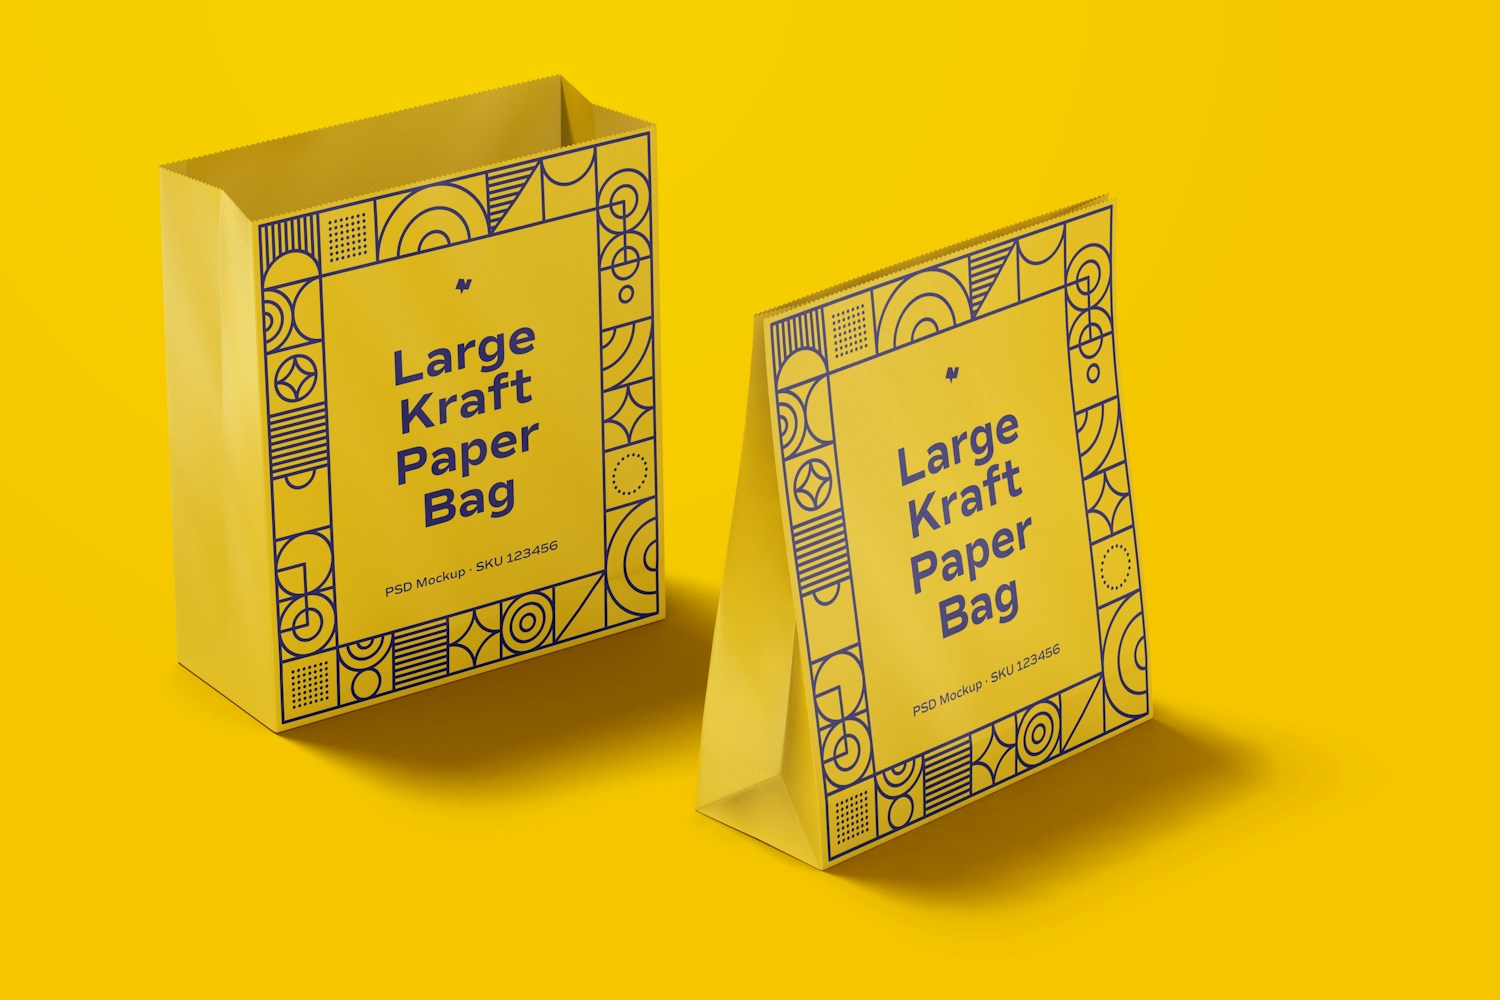 Large Kraft Paper Bags Mockup, Opened and Closed